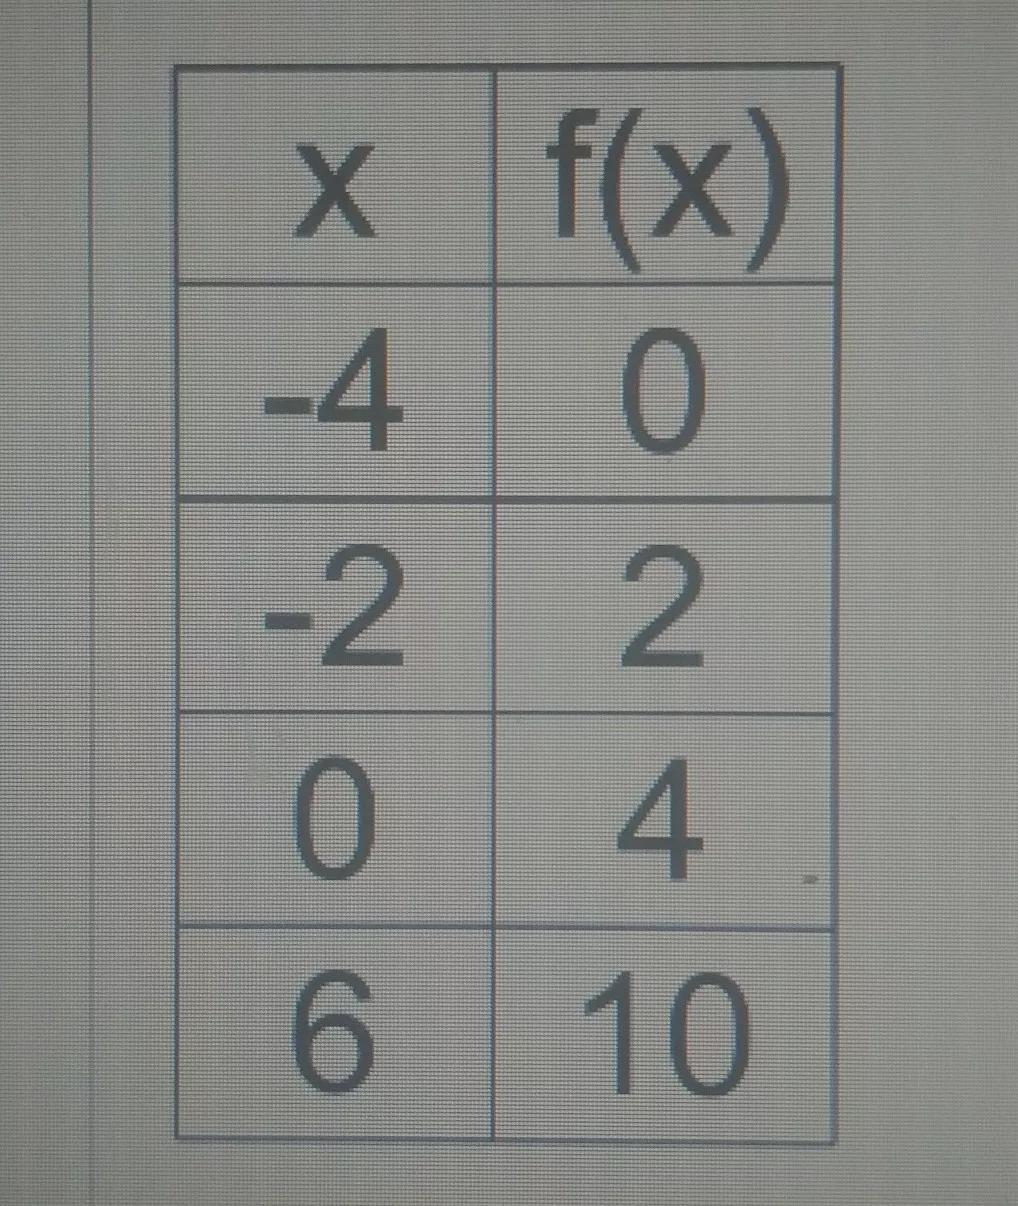 Identify The Maximum From The Tabletype Your Answer As An Ordered Pair (x,y)